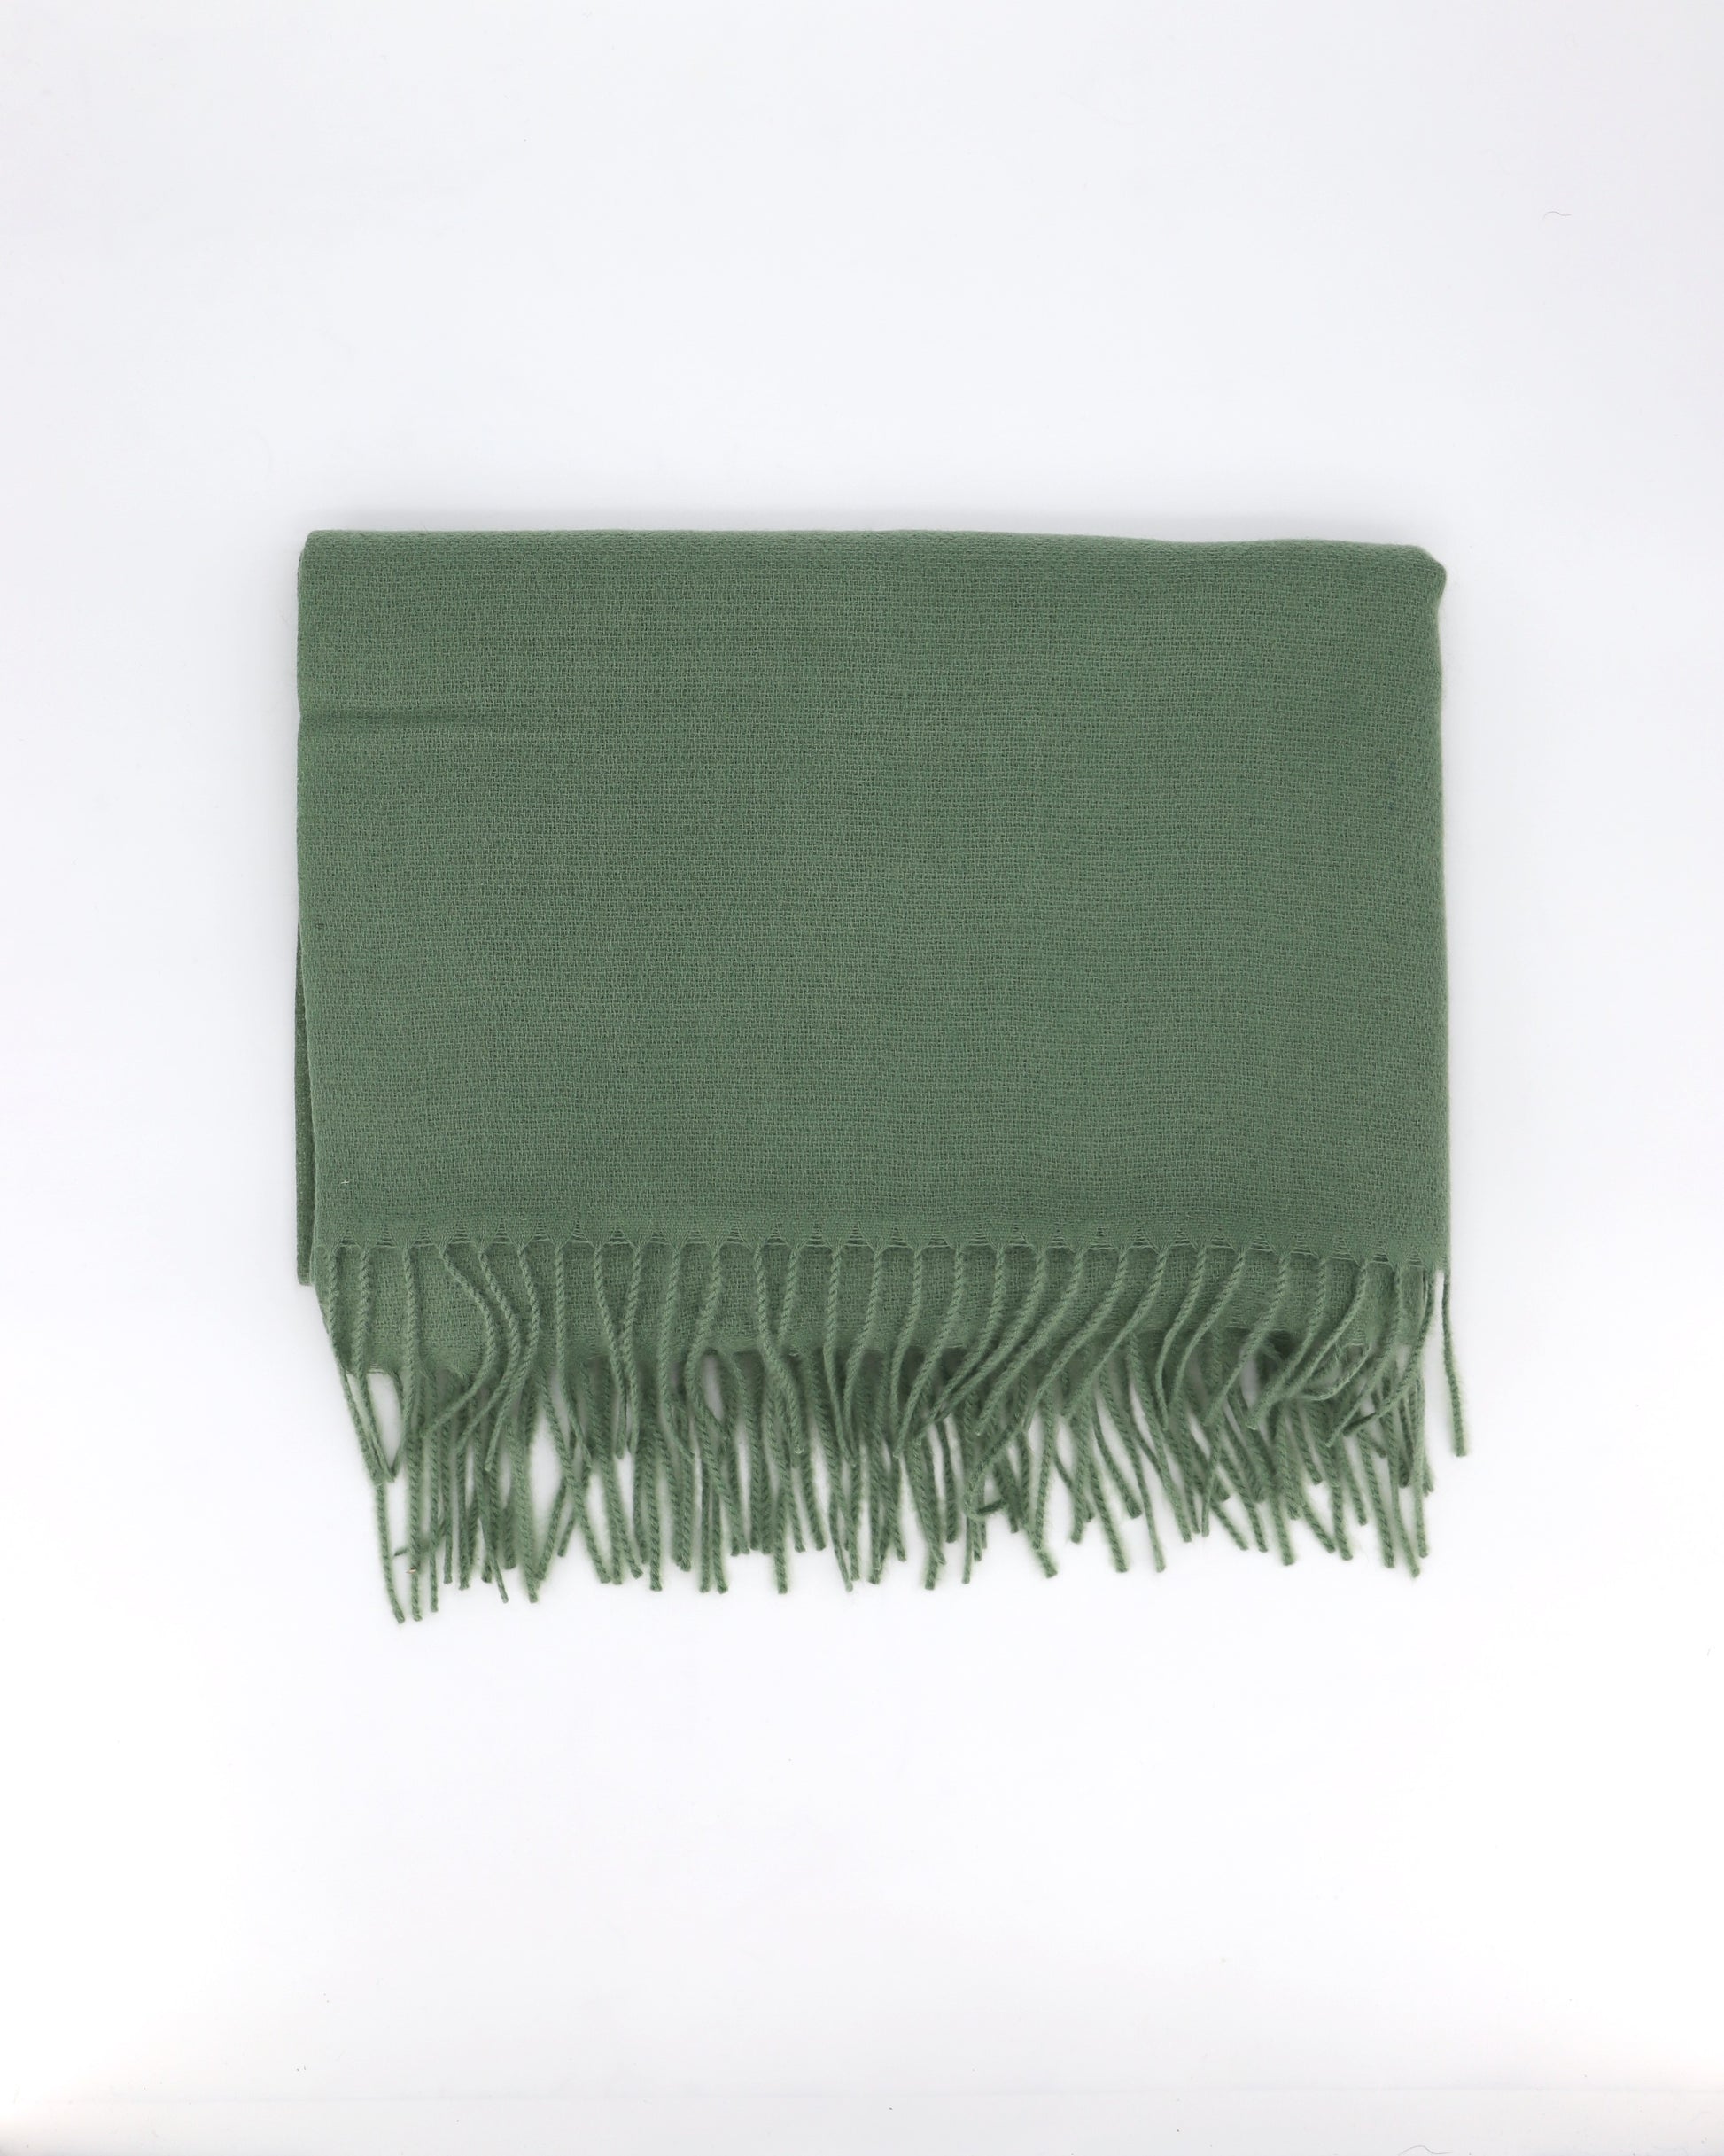 Soft Wool and Cashmere Scarf - Olive Green - Scarf Designers